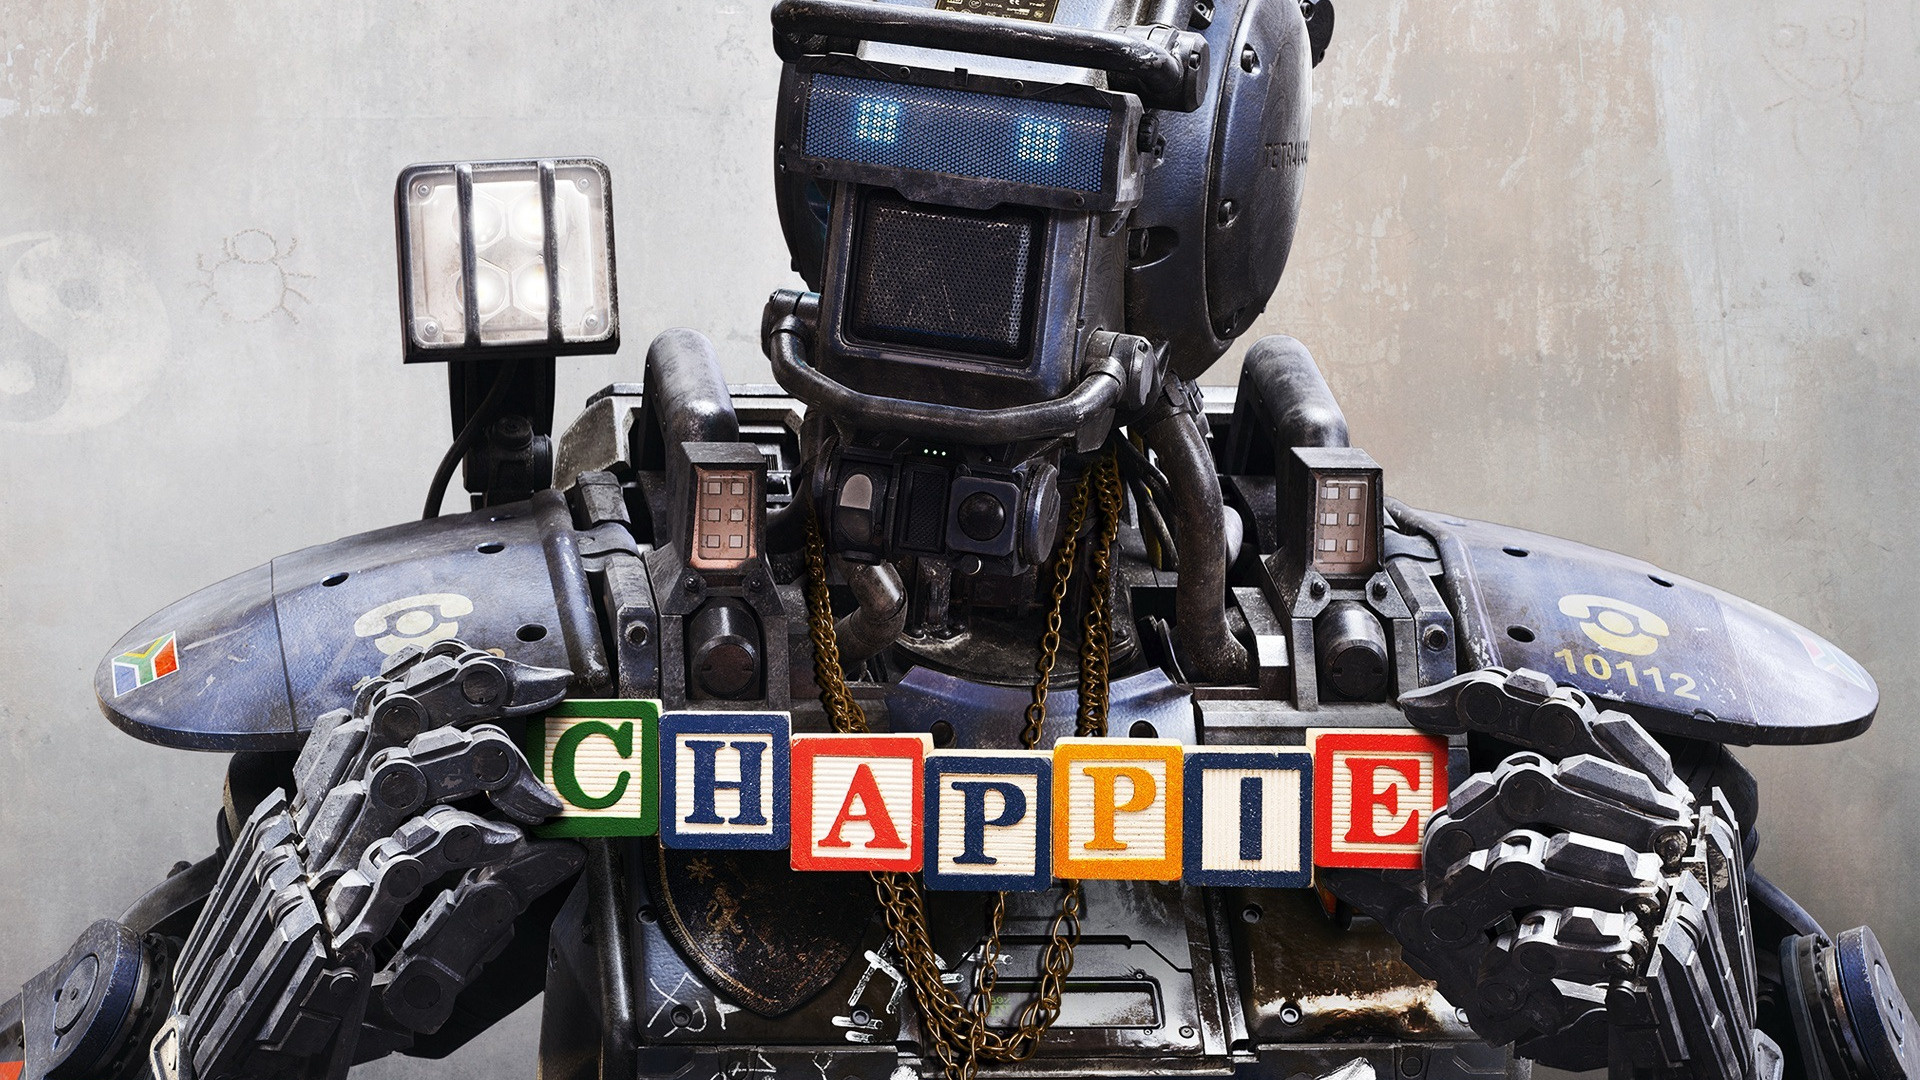 Chappie: Reprogrammed by its creator Deon to think for itself, Robot. 1920x1080 Full HD Wallpaper.